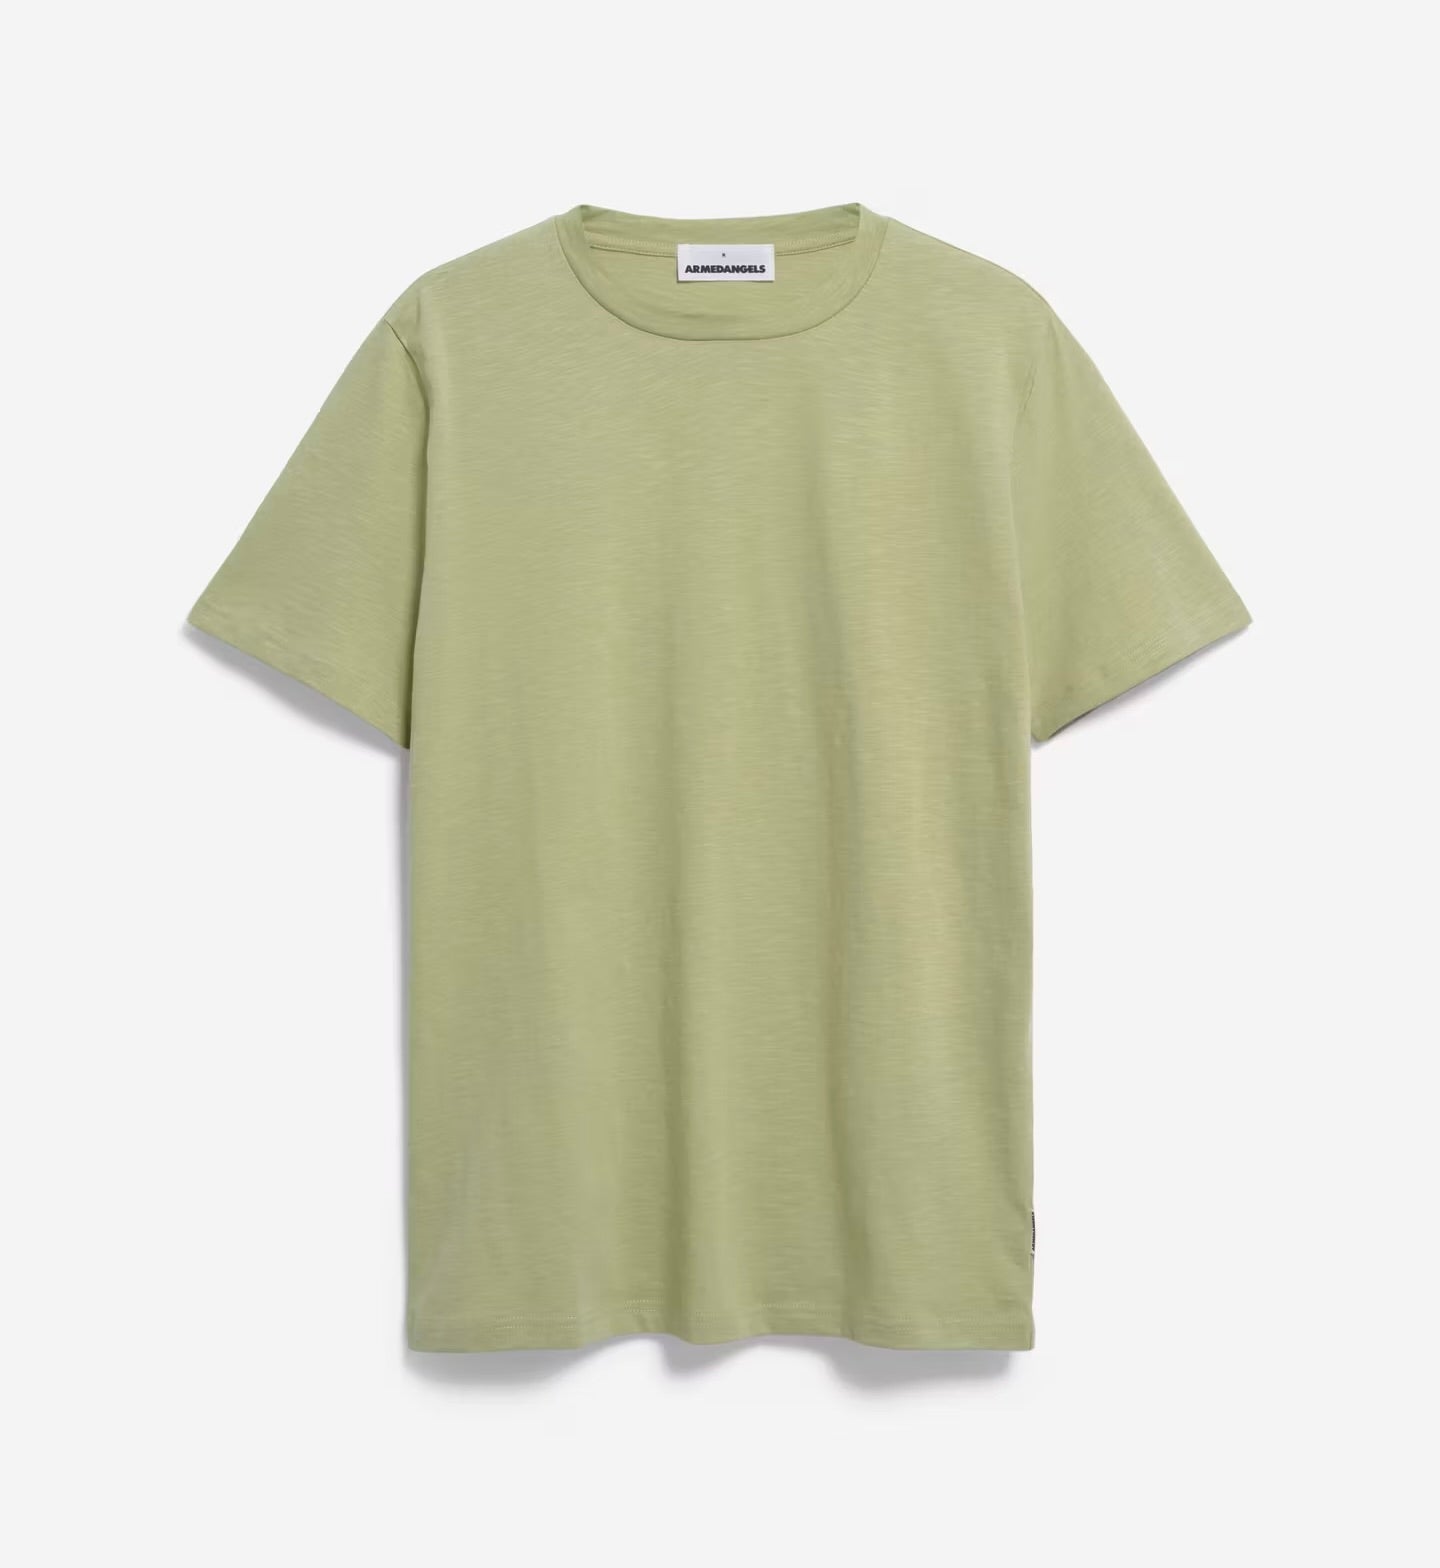 SS24 - ARMEDANGELS - Jaamel Structure T-Shirt in Light Matcha - on display front 6